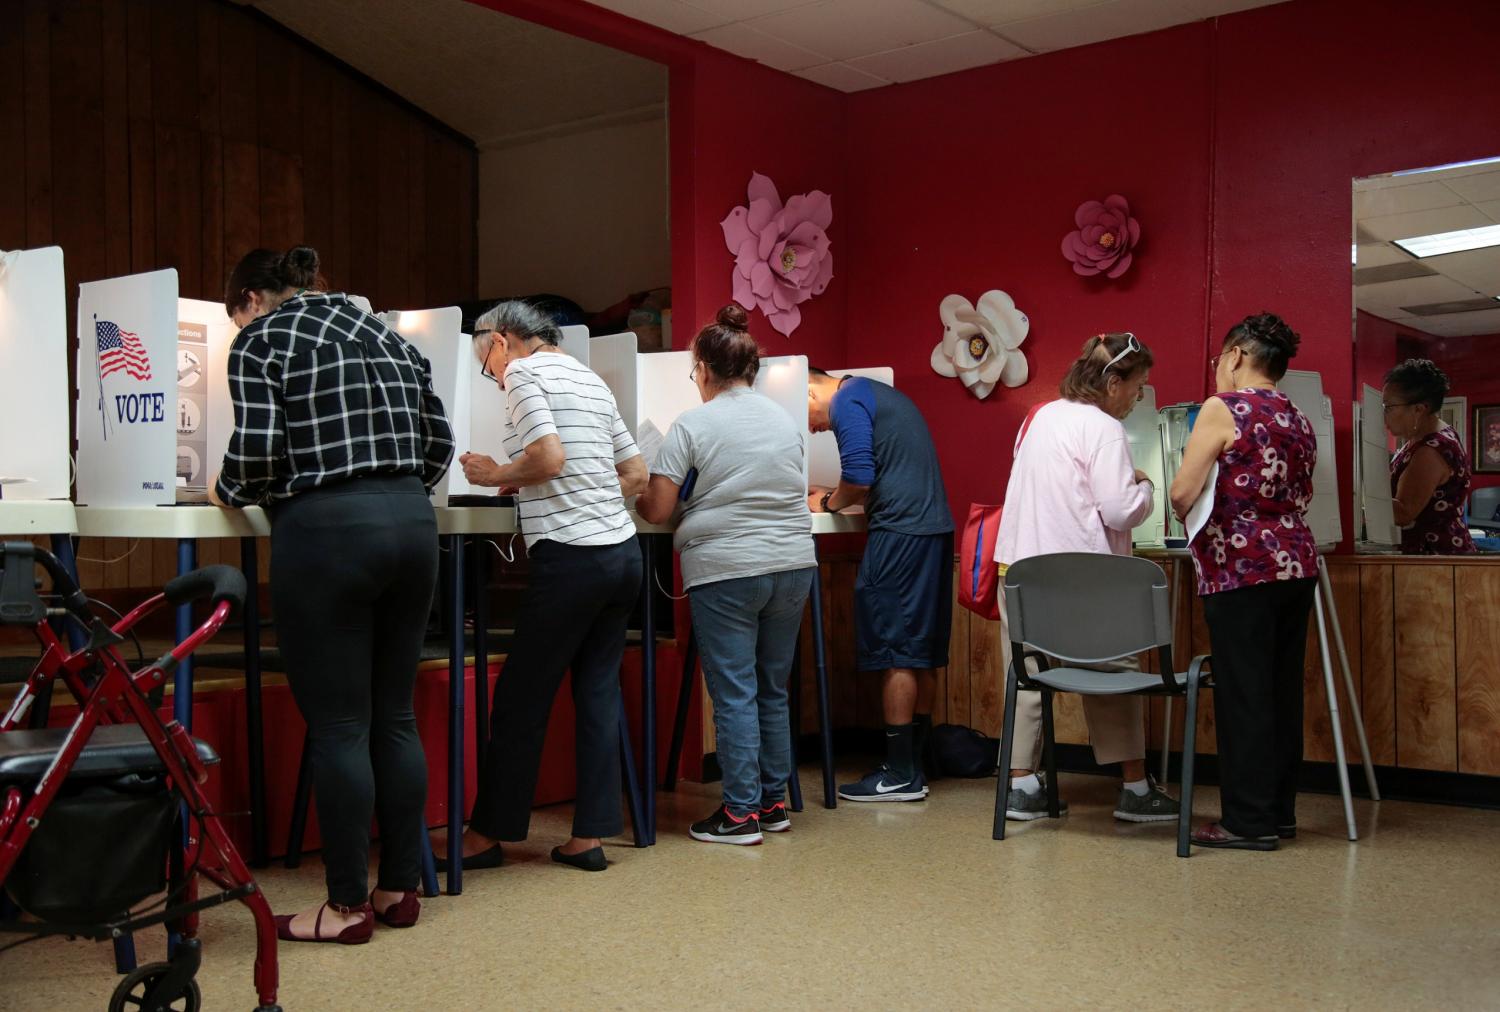 Voters cast their ballots in the Eastmont Community Center during midterms elections in East Los Angeles, California, U.S. November 6, 2018.  REUTERS/Kyle Grillot - RC1792D4D200